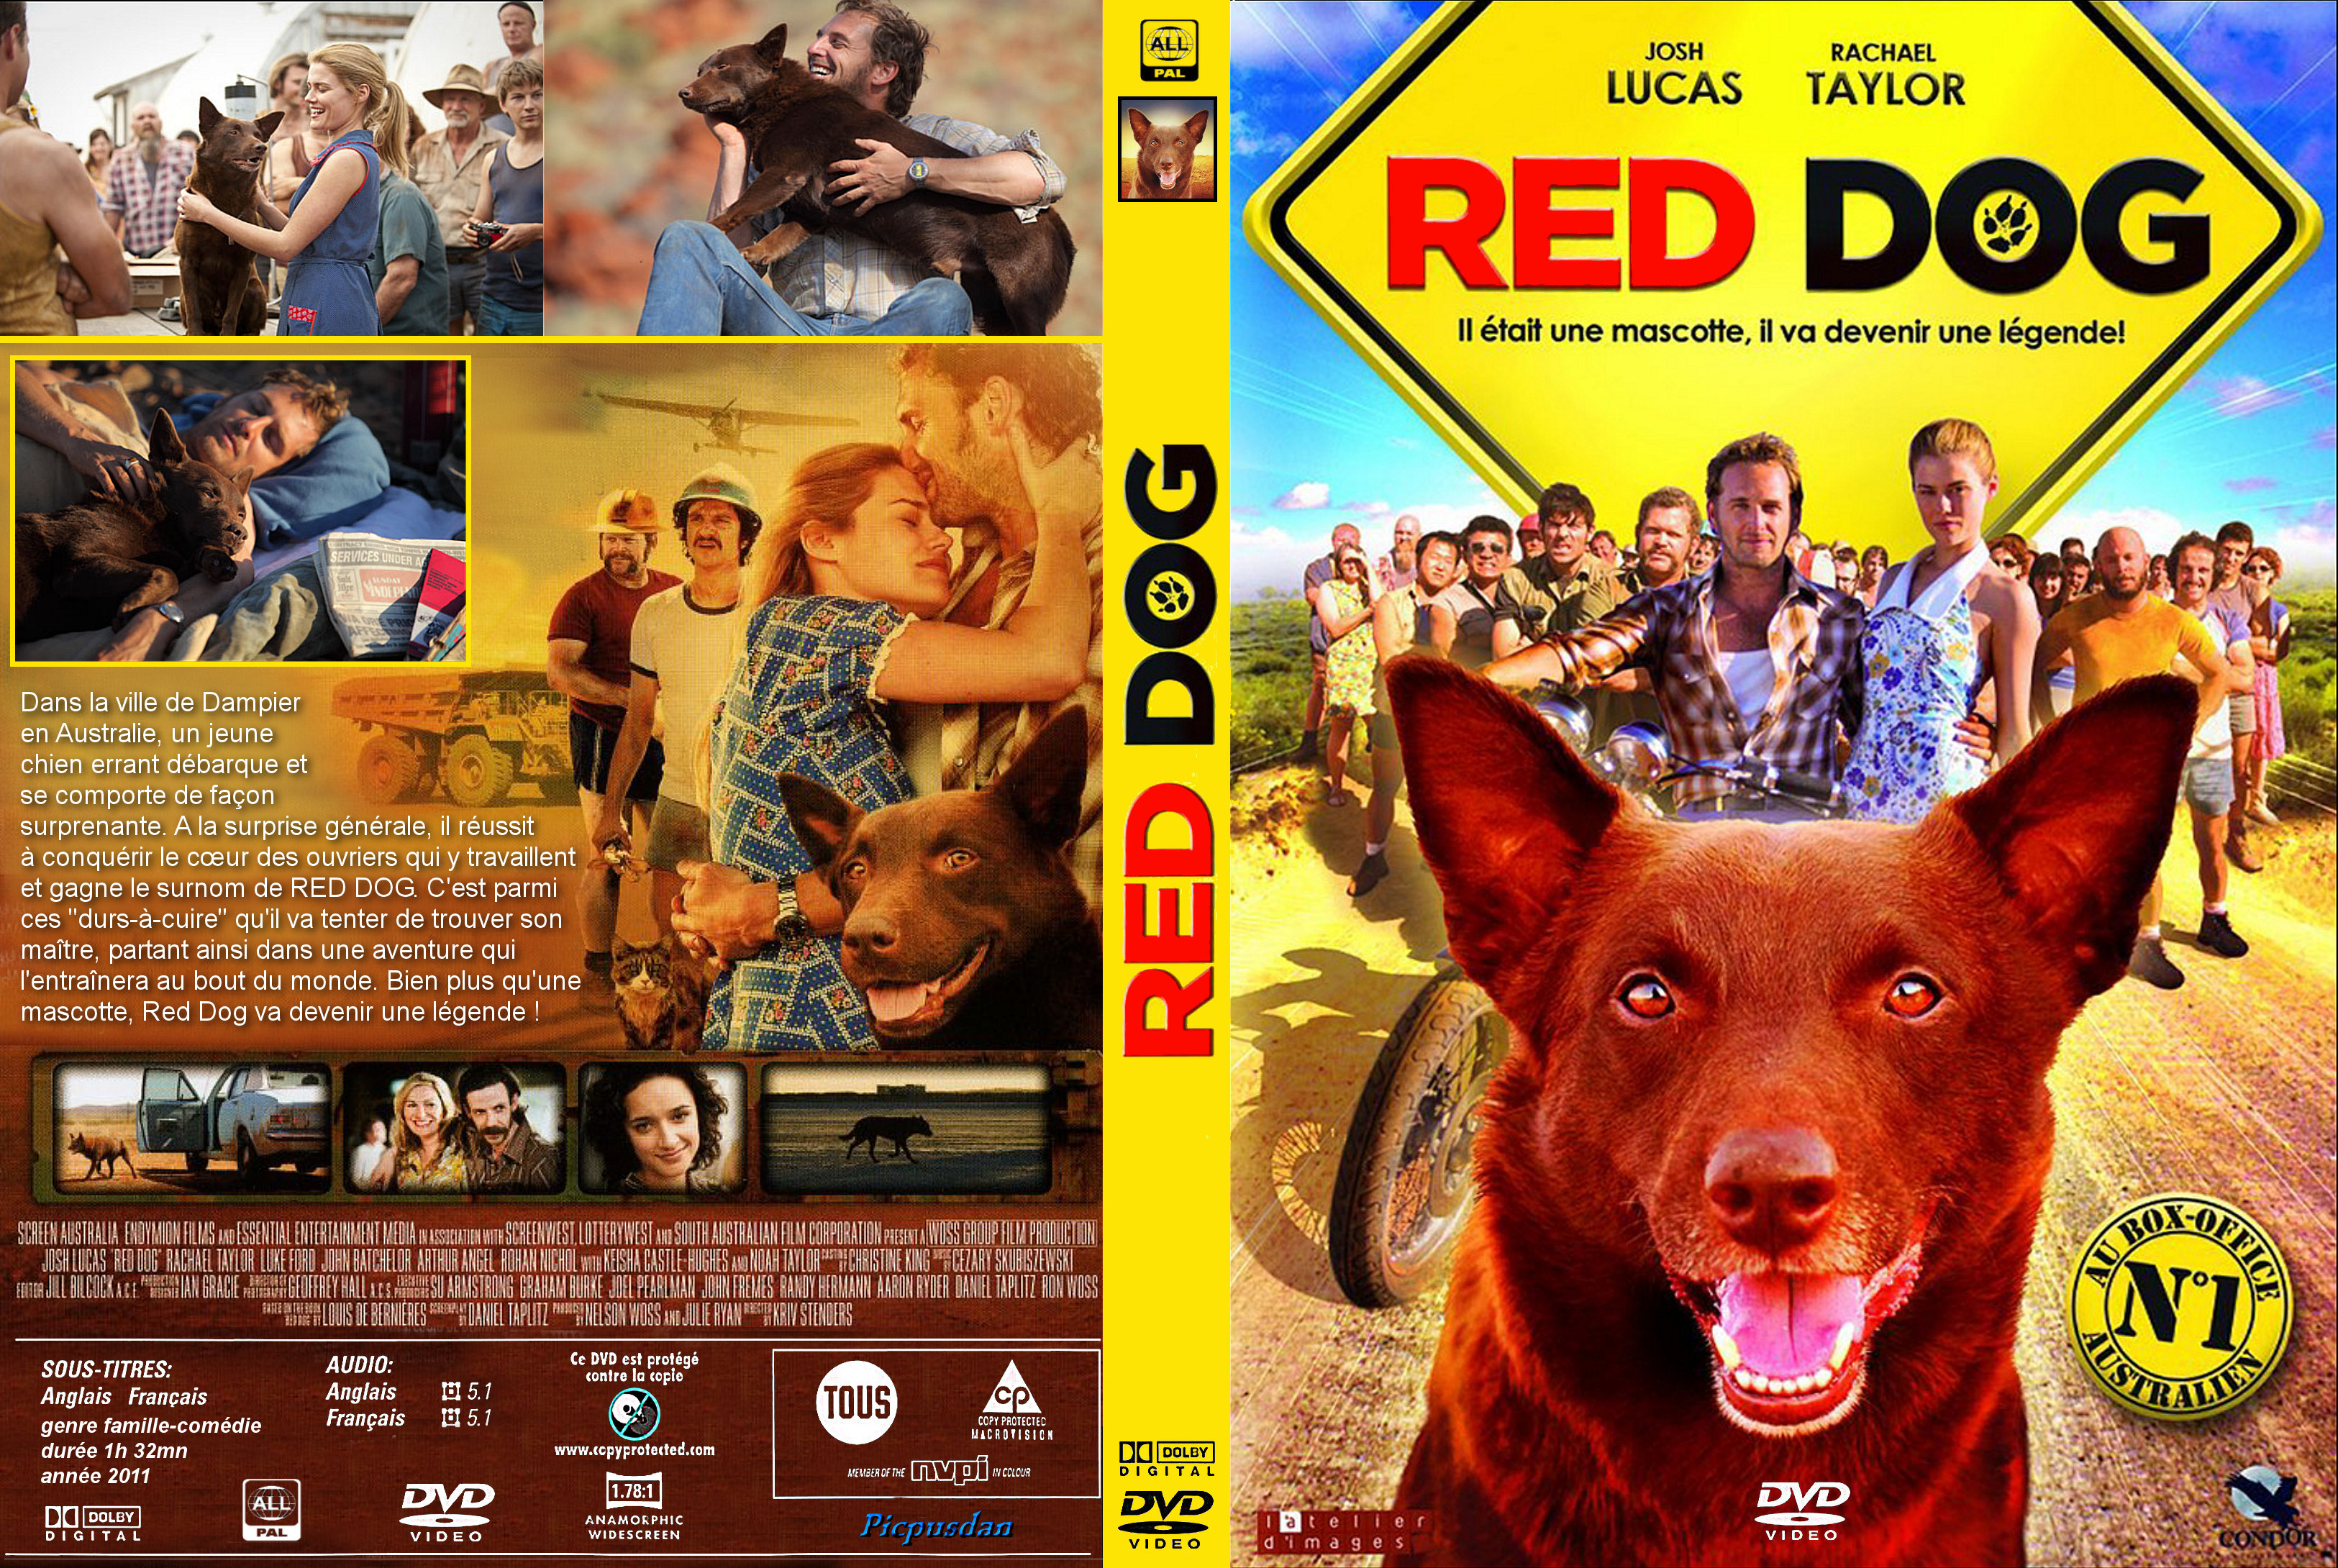 Jaquette DVD Red Dog custom